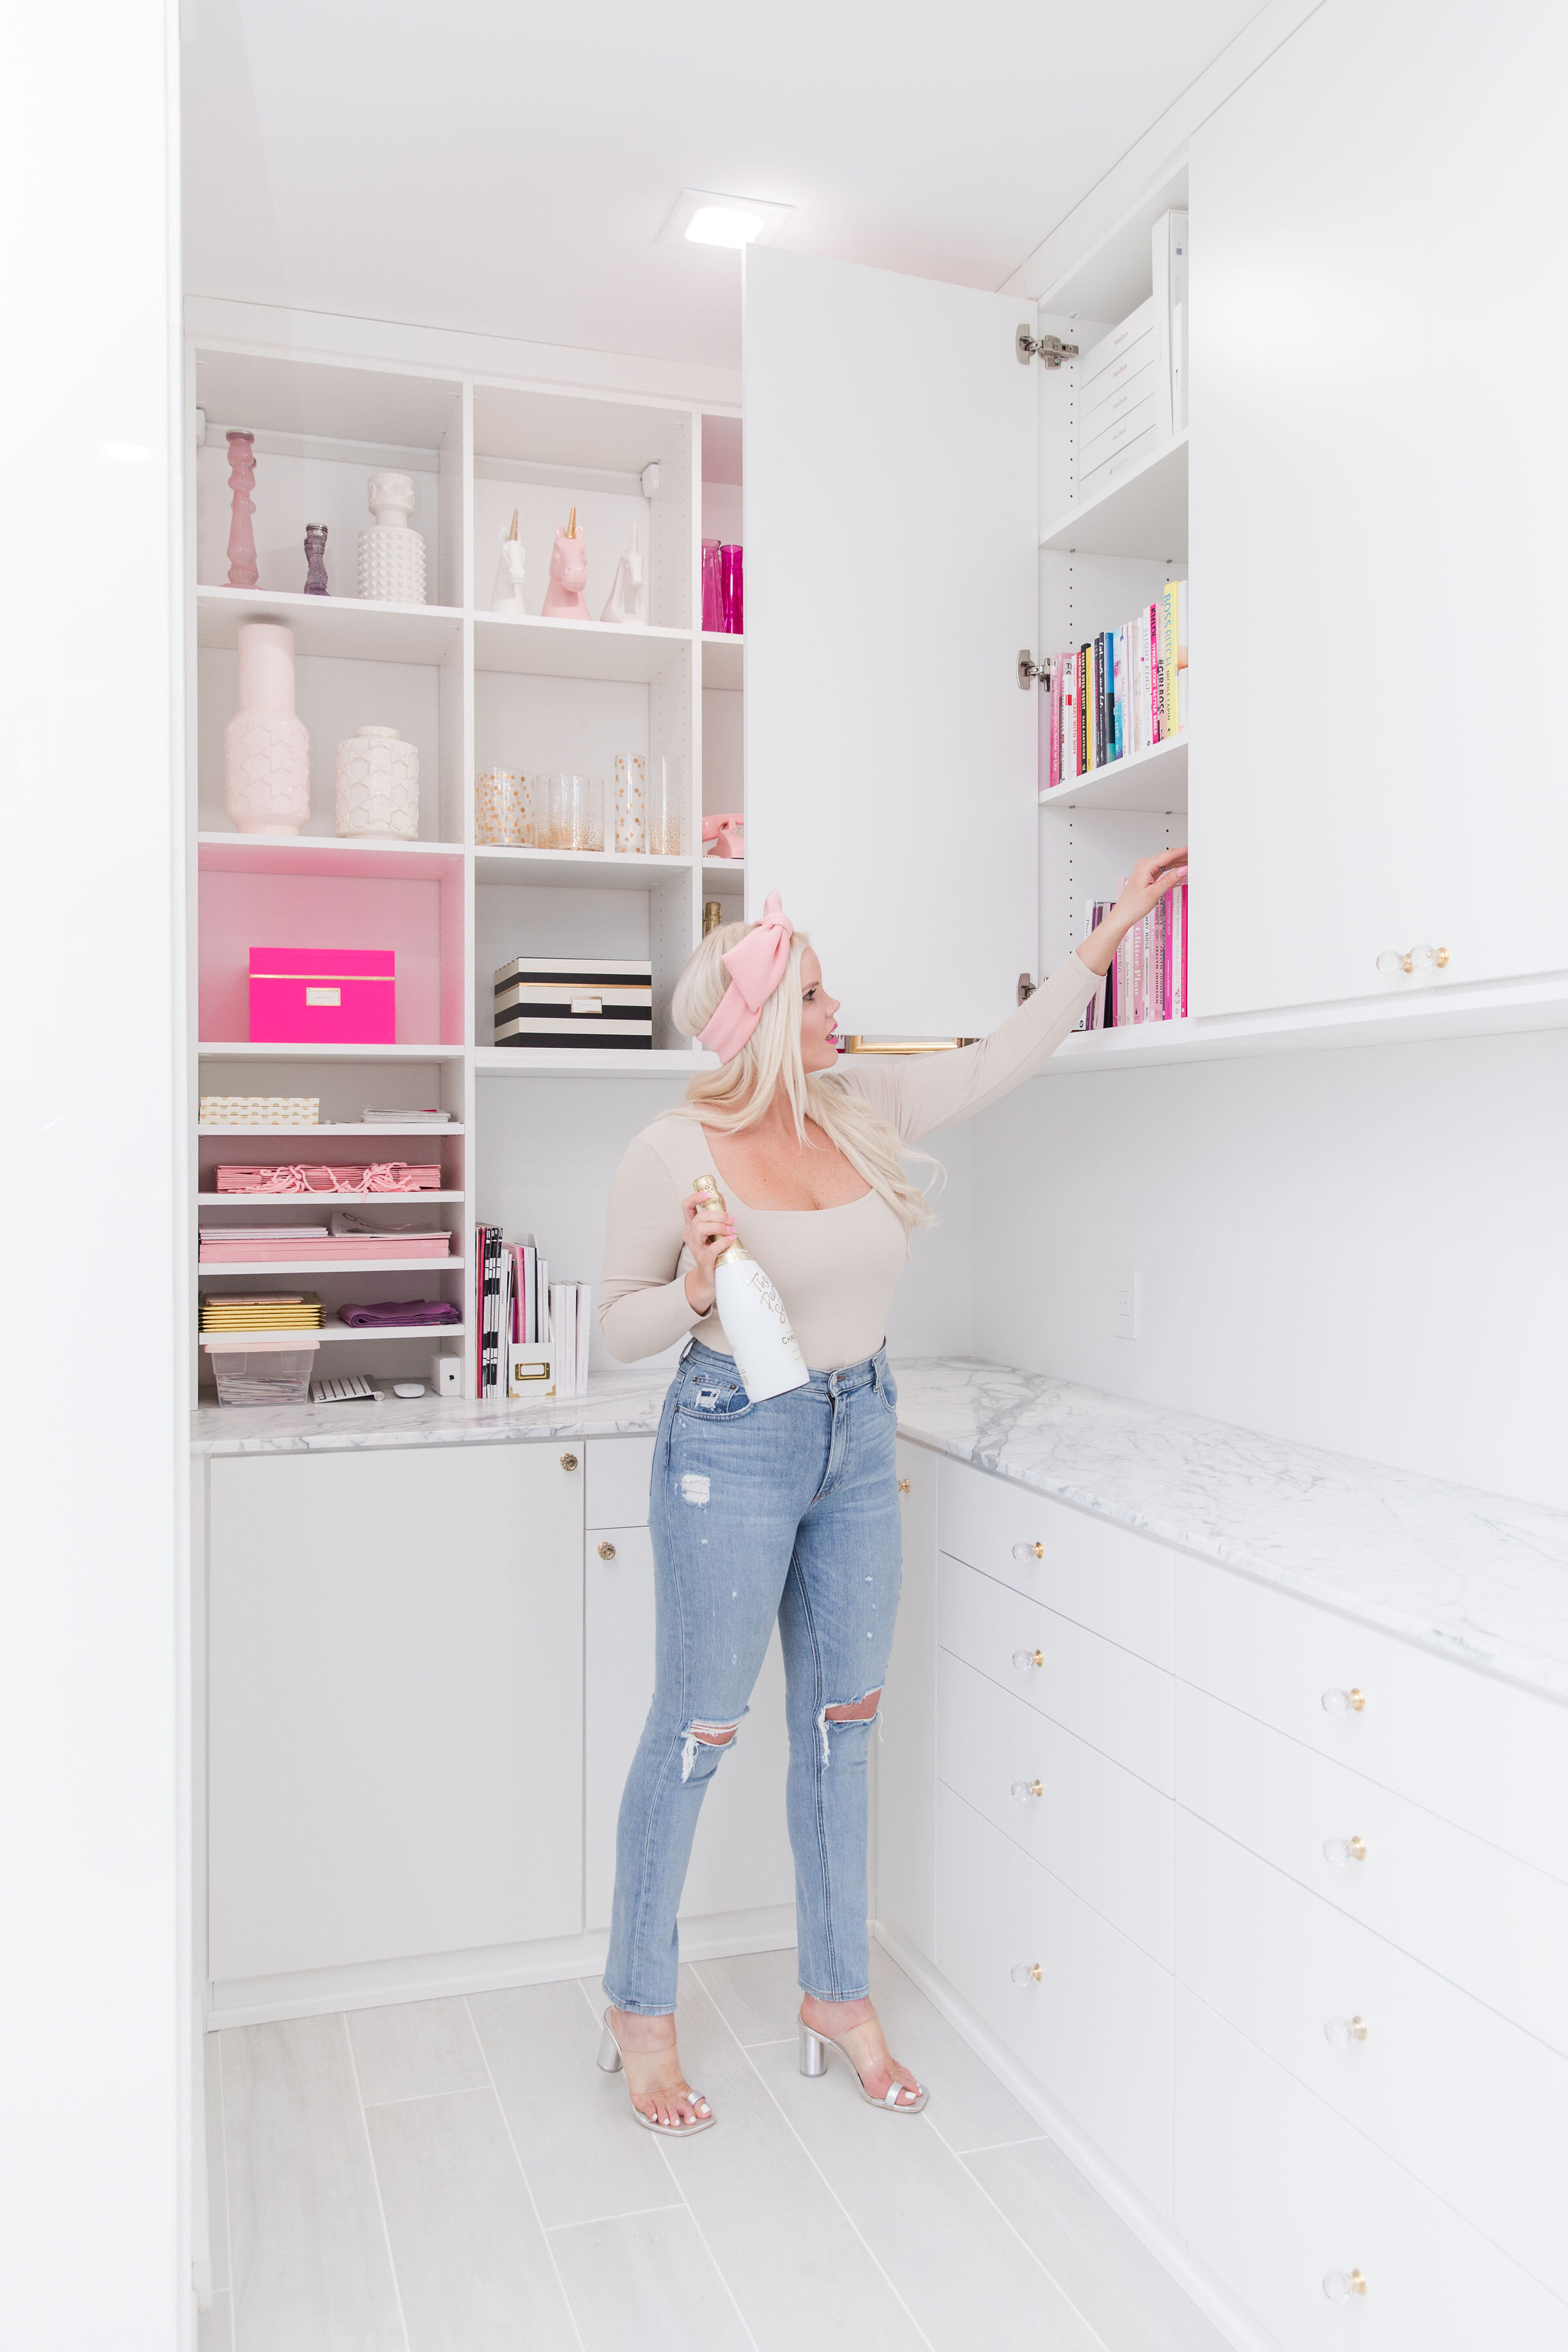 POSH-PR-The-Caroline-Doll-Barbie-Office-Pink-Style-Boss-Goals-At-Home-Workspace-Luxury-Fashion-Infused-Office-The-Doll-HQ-Organized-Storage-Room-Office-Goals-California-Closets-Custom-Cabinets-Acrylic-Crystal-Details-4.jpg